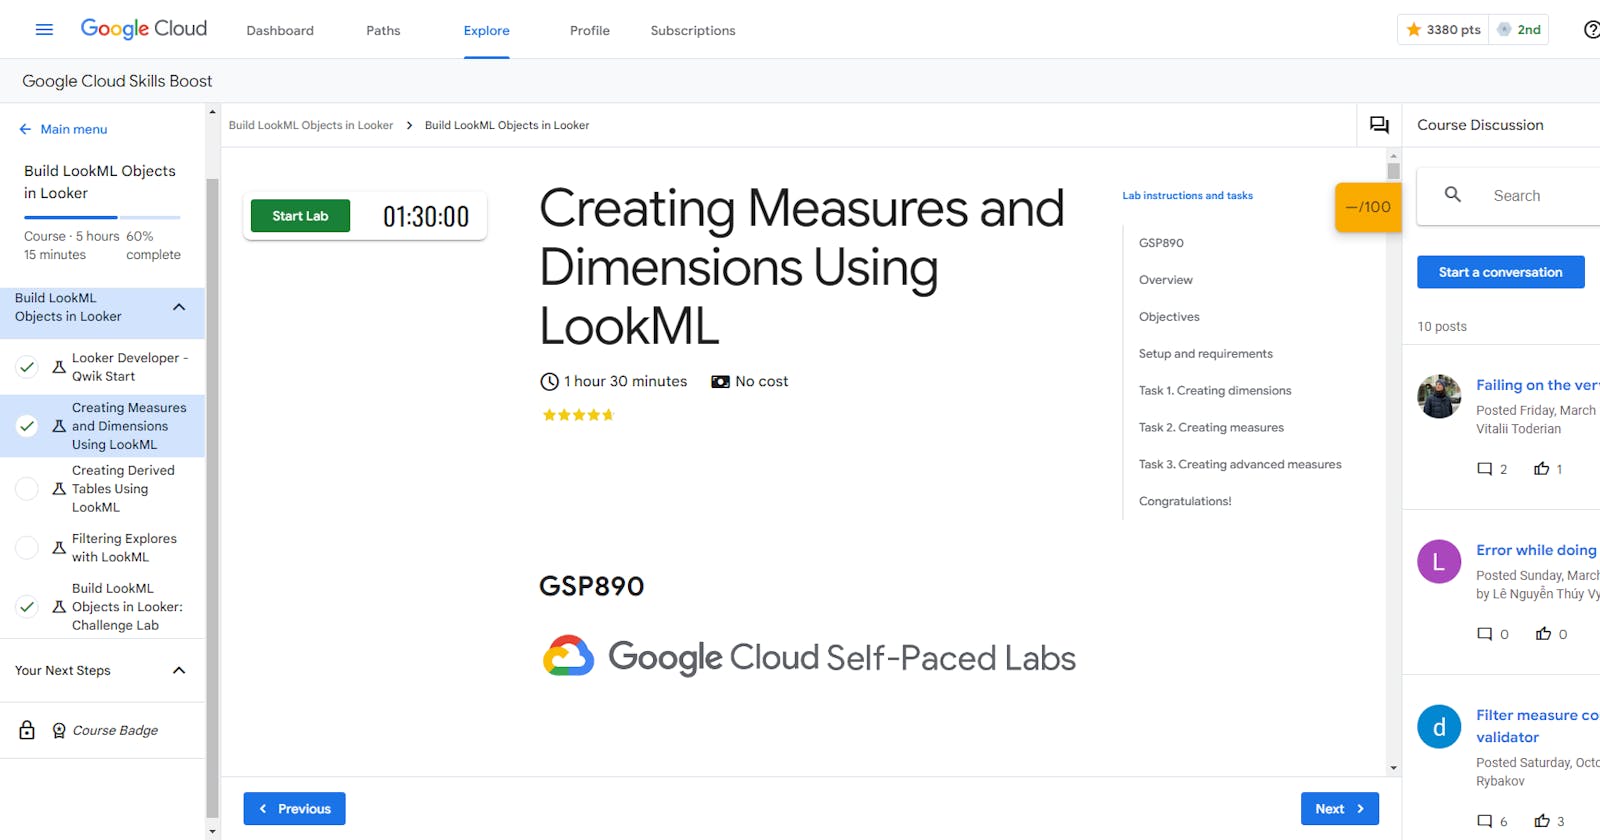 Creating Measures and Dimensions Using LookML - GSP890